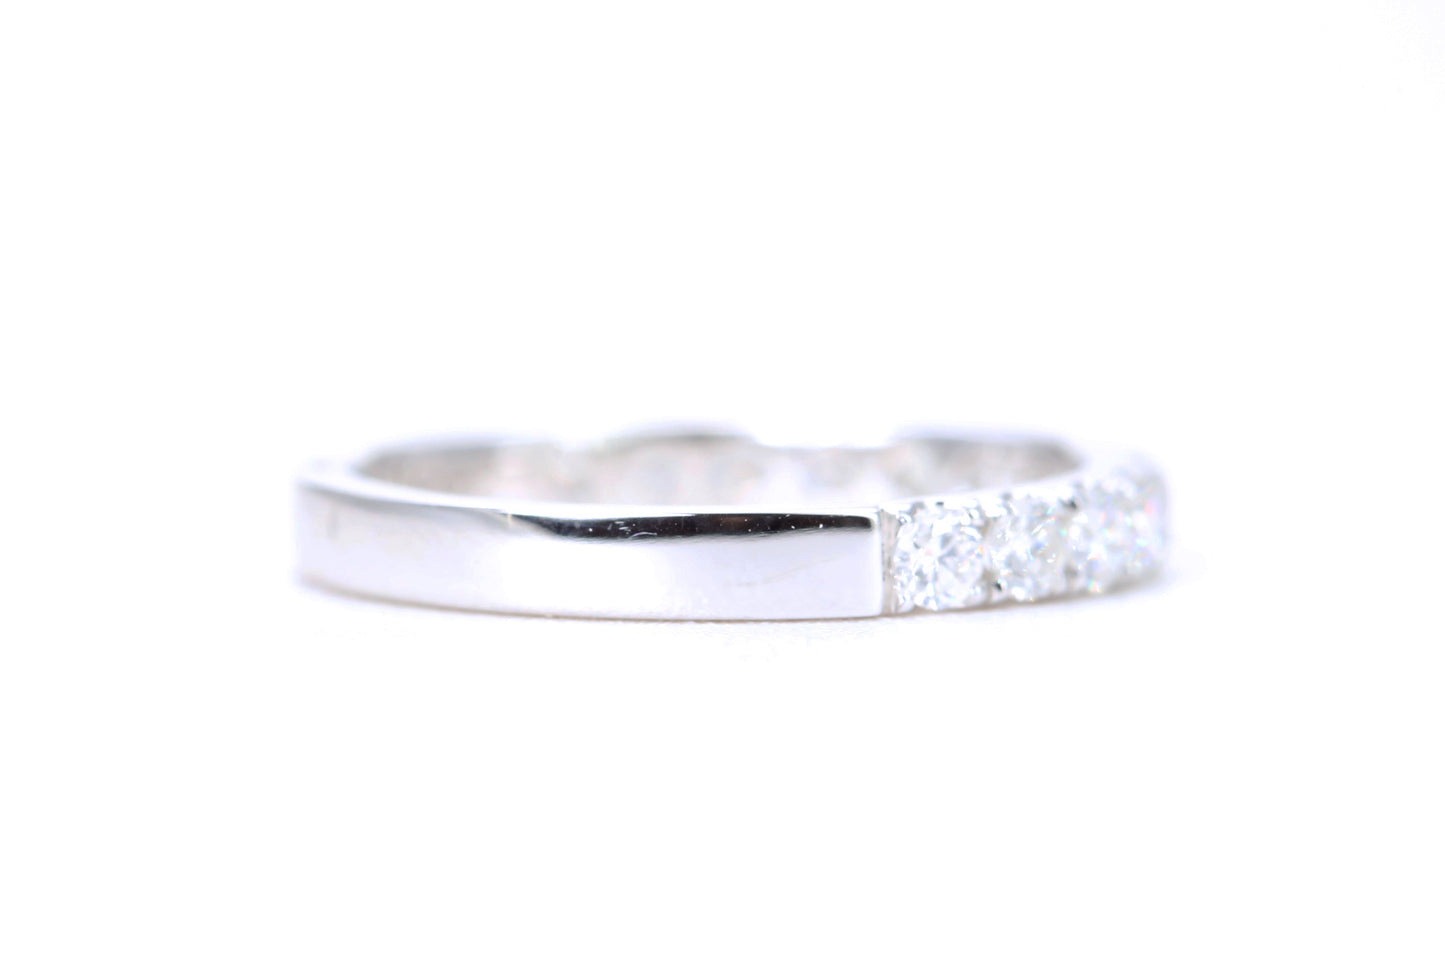 Load image into Gallery viewer, Micro Pavé 3/4 Carat Diamond Ring in 14K White Gold
